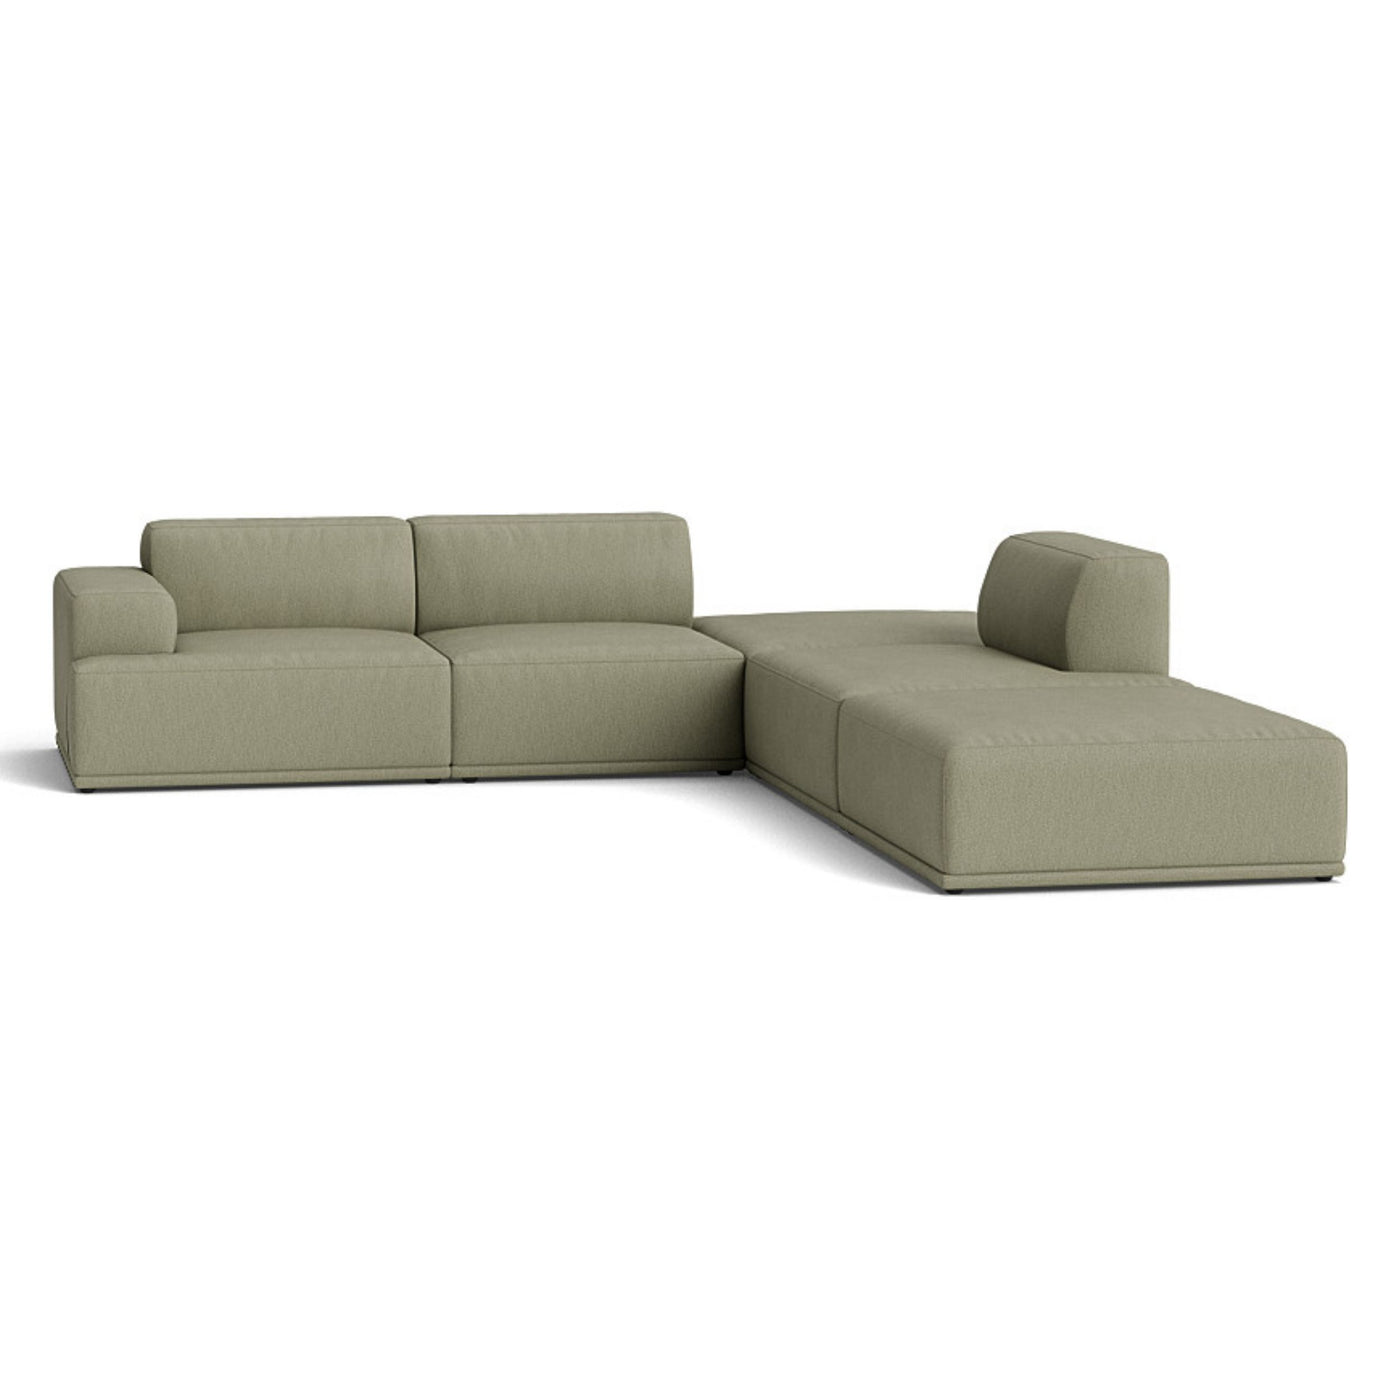 Muuto Connect Soft Modular Corner Sofa, configuration 3. made-to-order from someday designs. #colour_clay-15